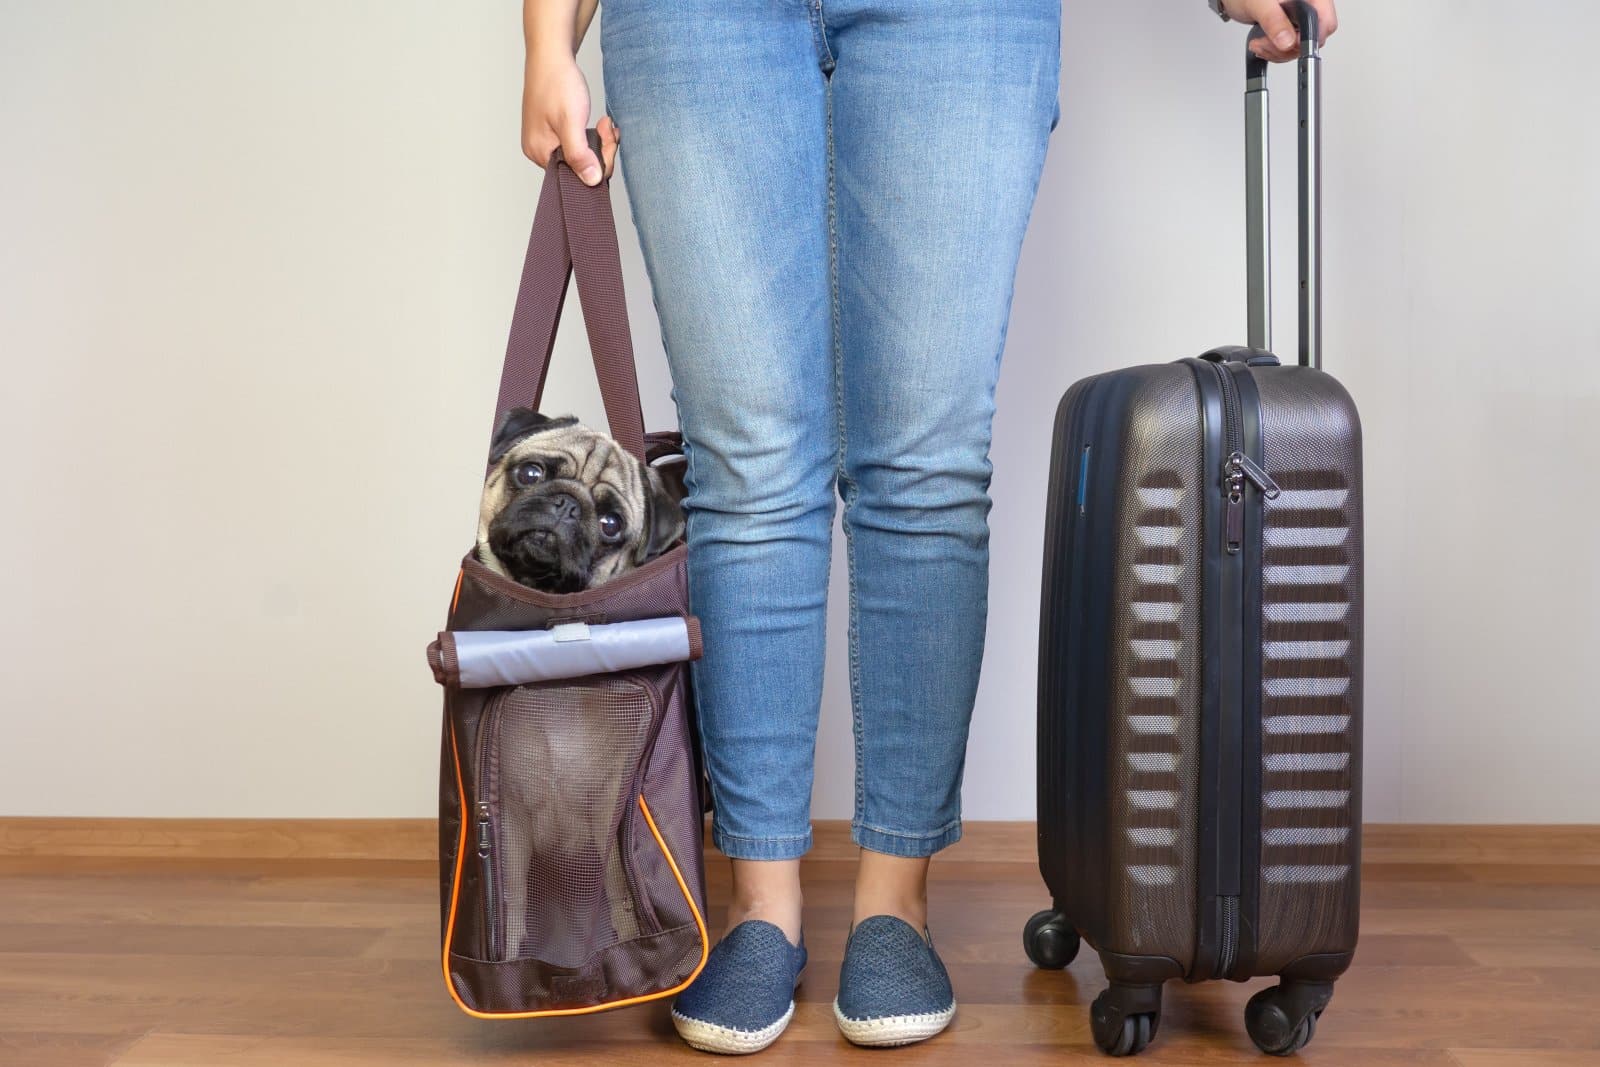 <p class="wp-caption-text">Image Credit: Shutterstock / Yekatseryna Netuk</p>  <p><span>Bring their favorite toys, enough food for the trip, water, bowls, waste bags, and any medications. It’s their little suitcase.</span></p>